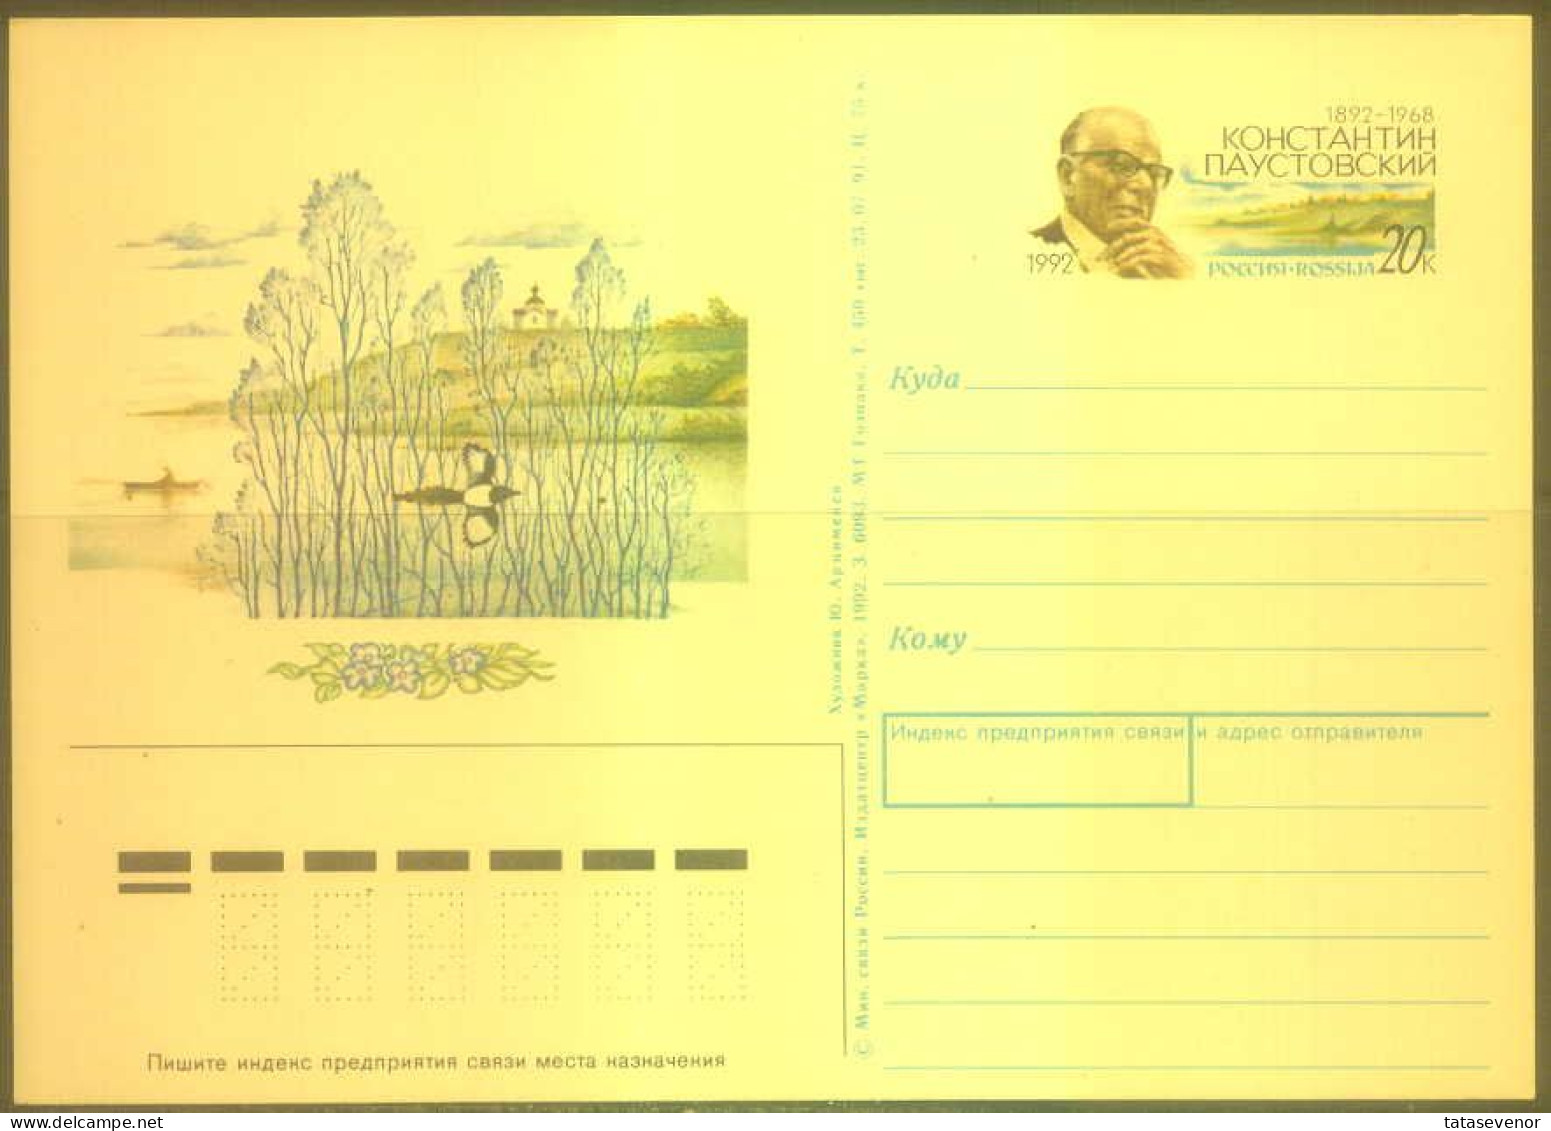 RUSSIA Stamped Stationery Postcard RU 001 Personalities Writer Paustovsky Birds Fishing - Stamped Stationery